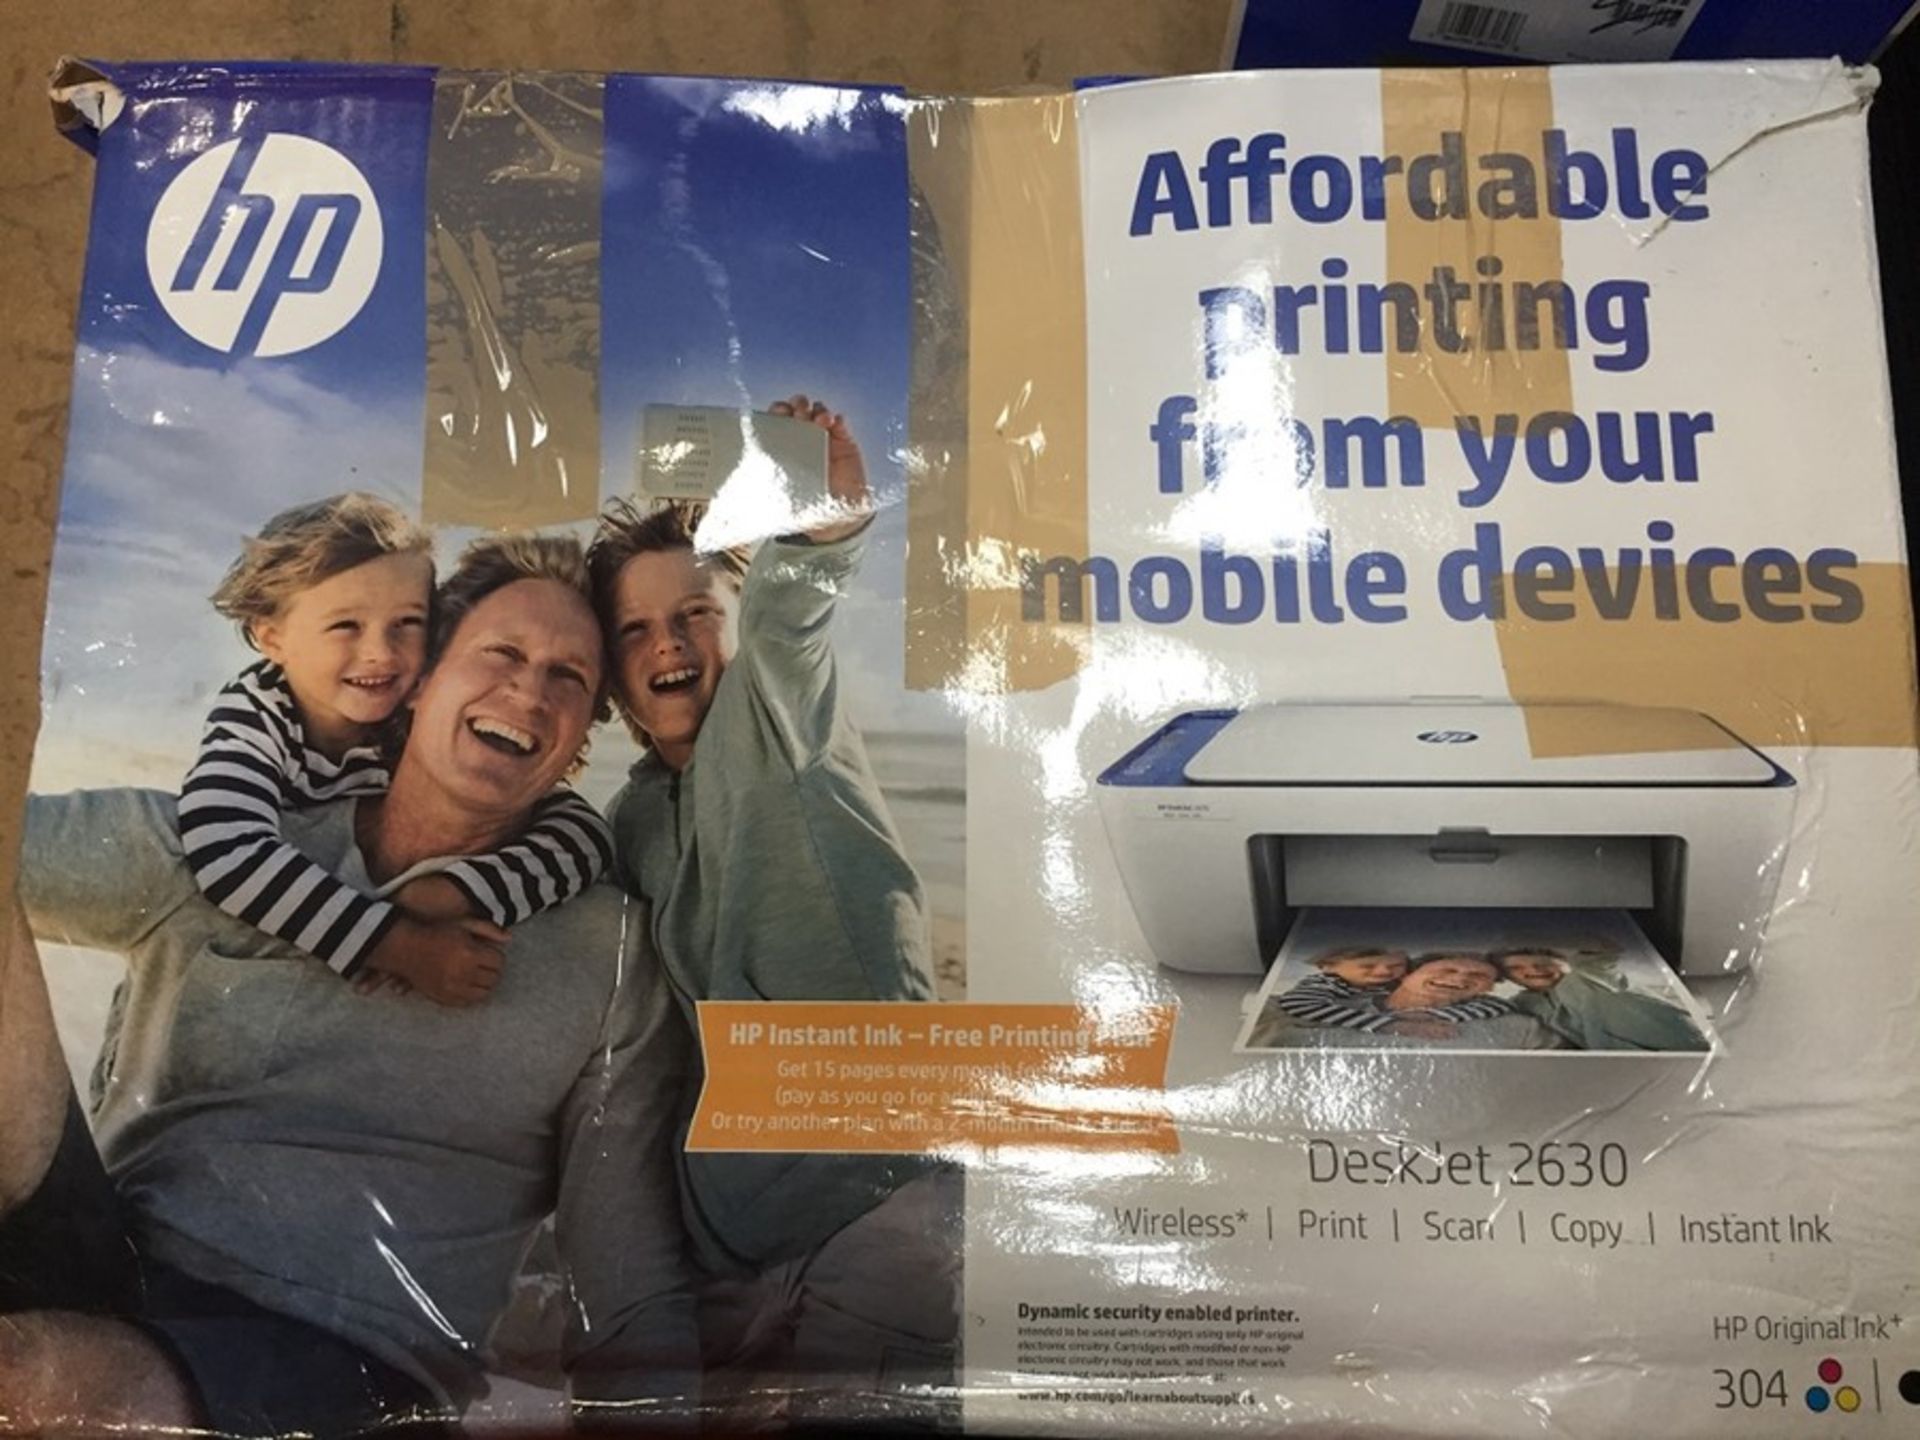 1 BOXED HP DESKJET 2630 ALL IN ONE PRINTER IN WHITE / RRP £33.00 - BL6650 (VIEWING HIGHLY